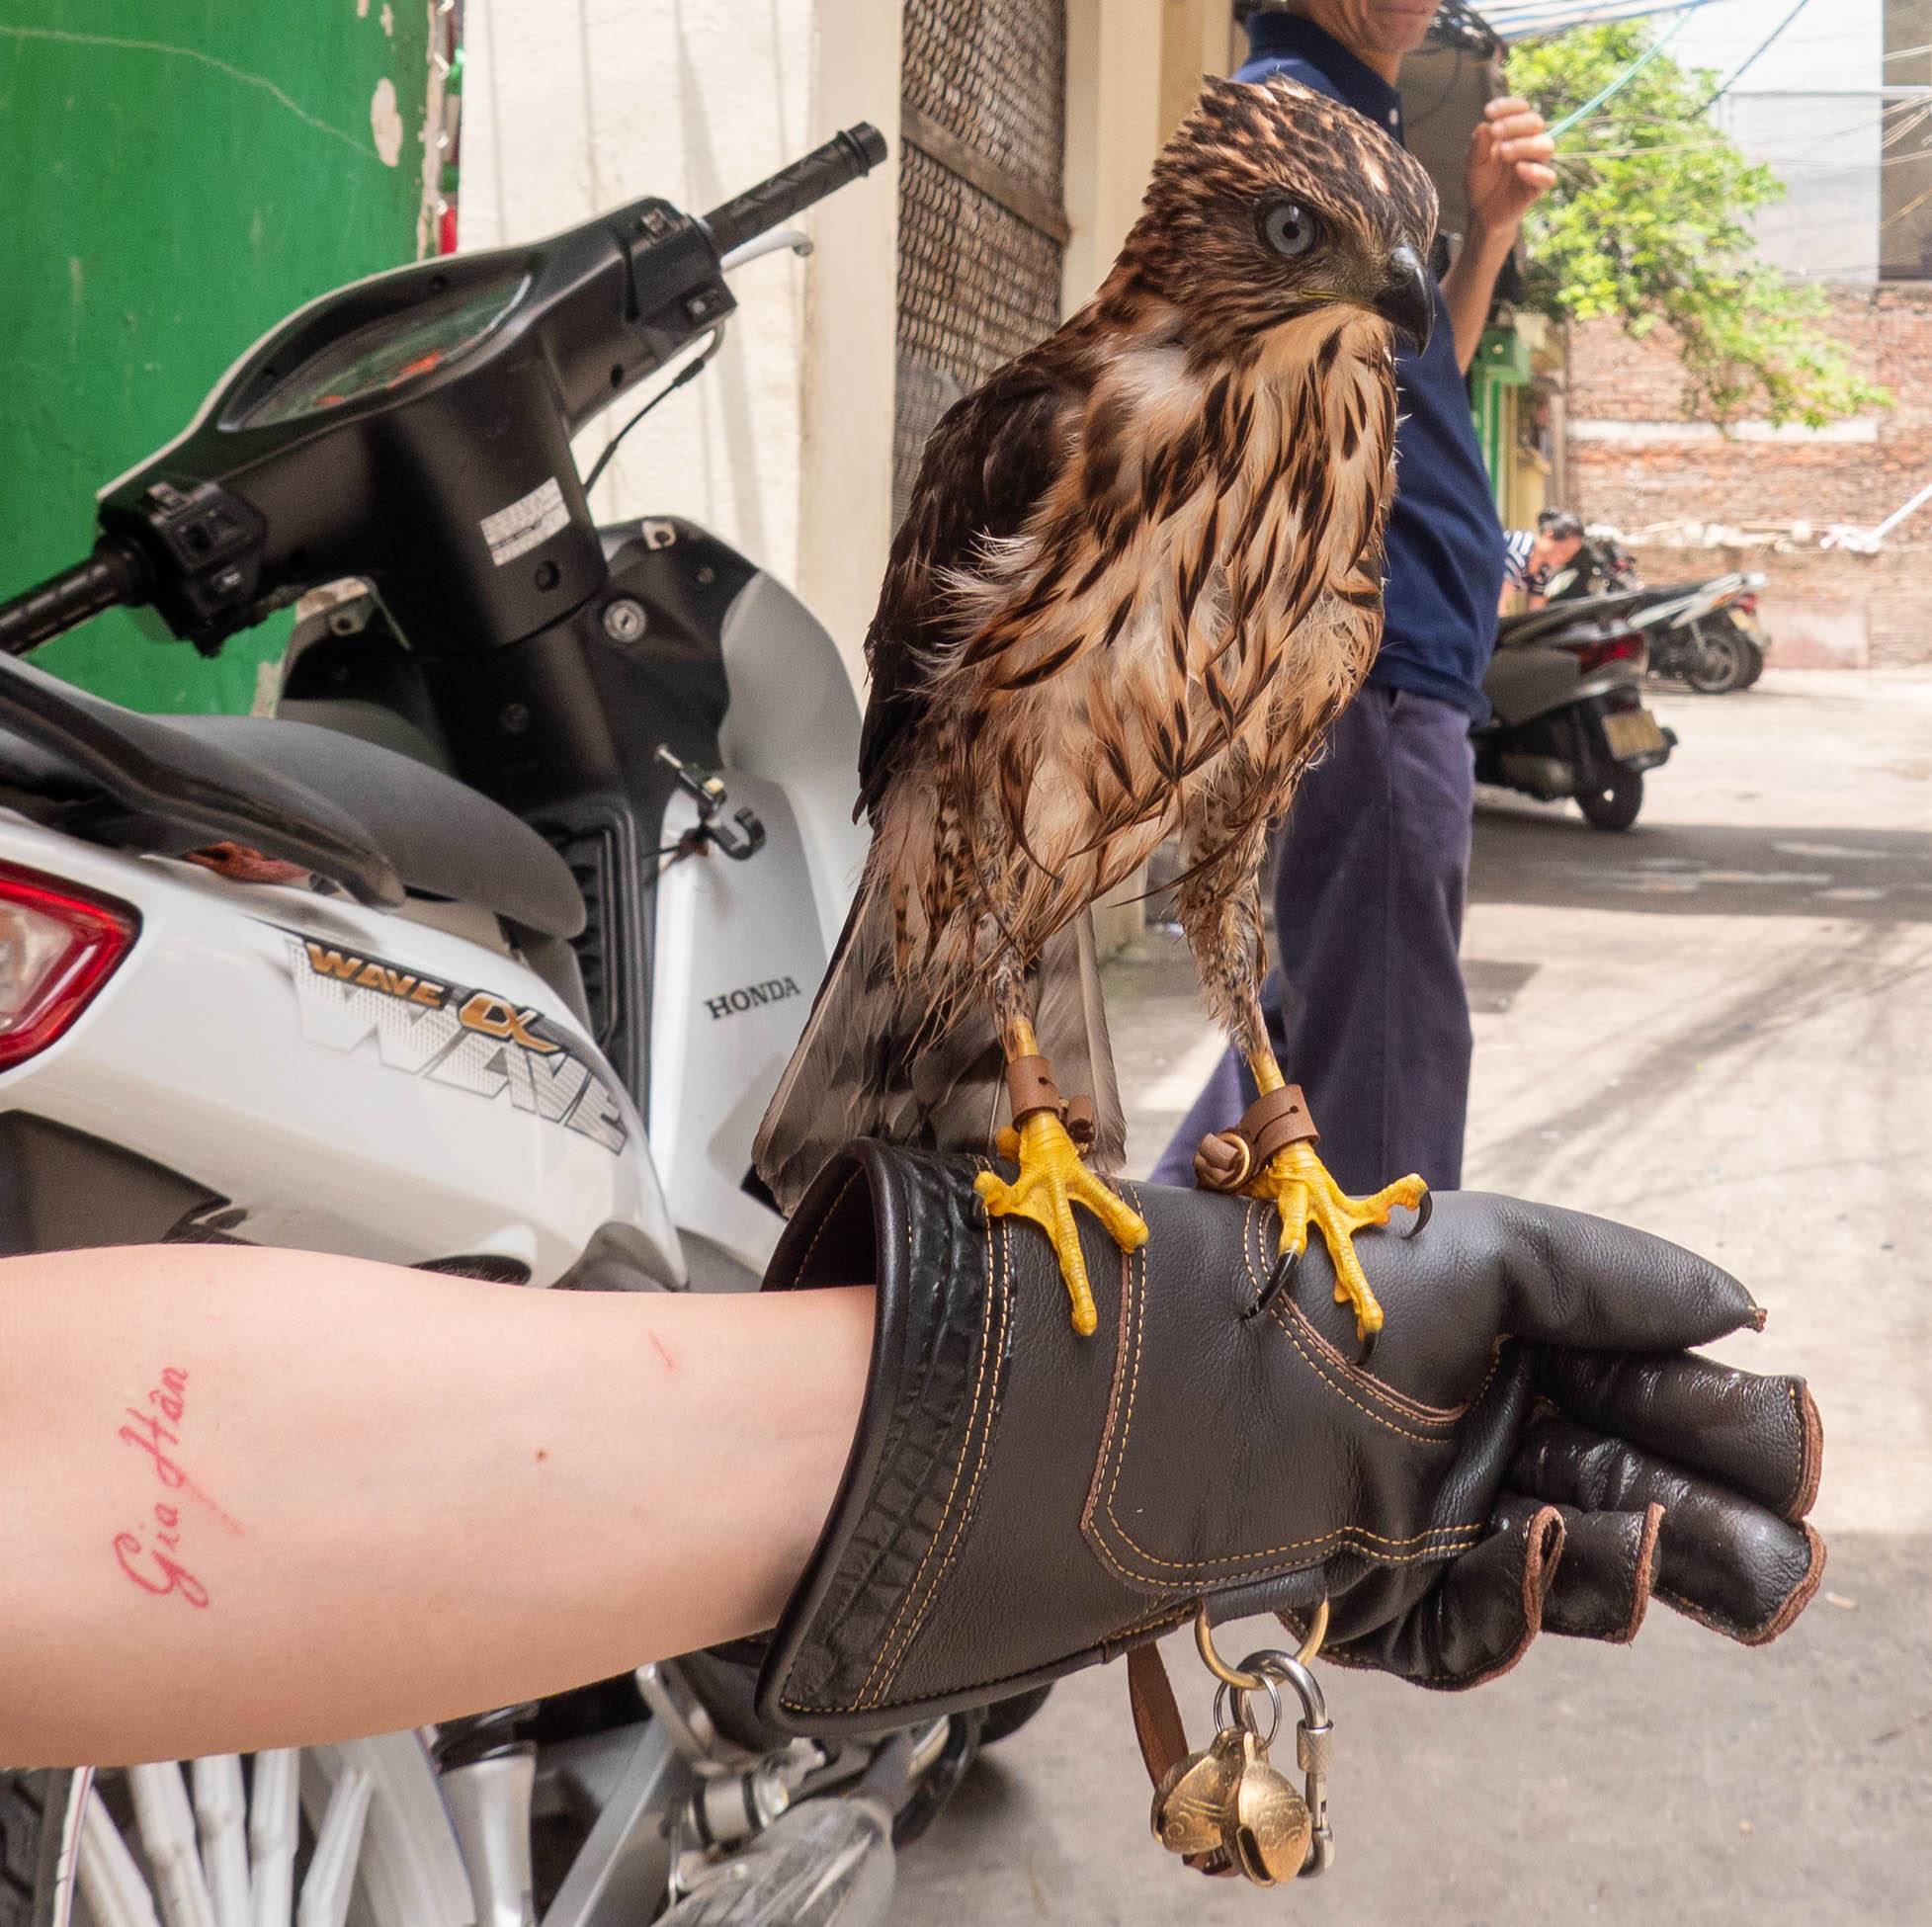 Picture of an arm with a brown glove and falcon gripping the glove. on the left side of the arm is a red tatto writen in Vietnamese.